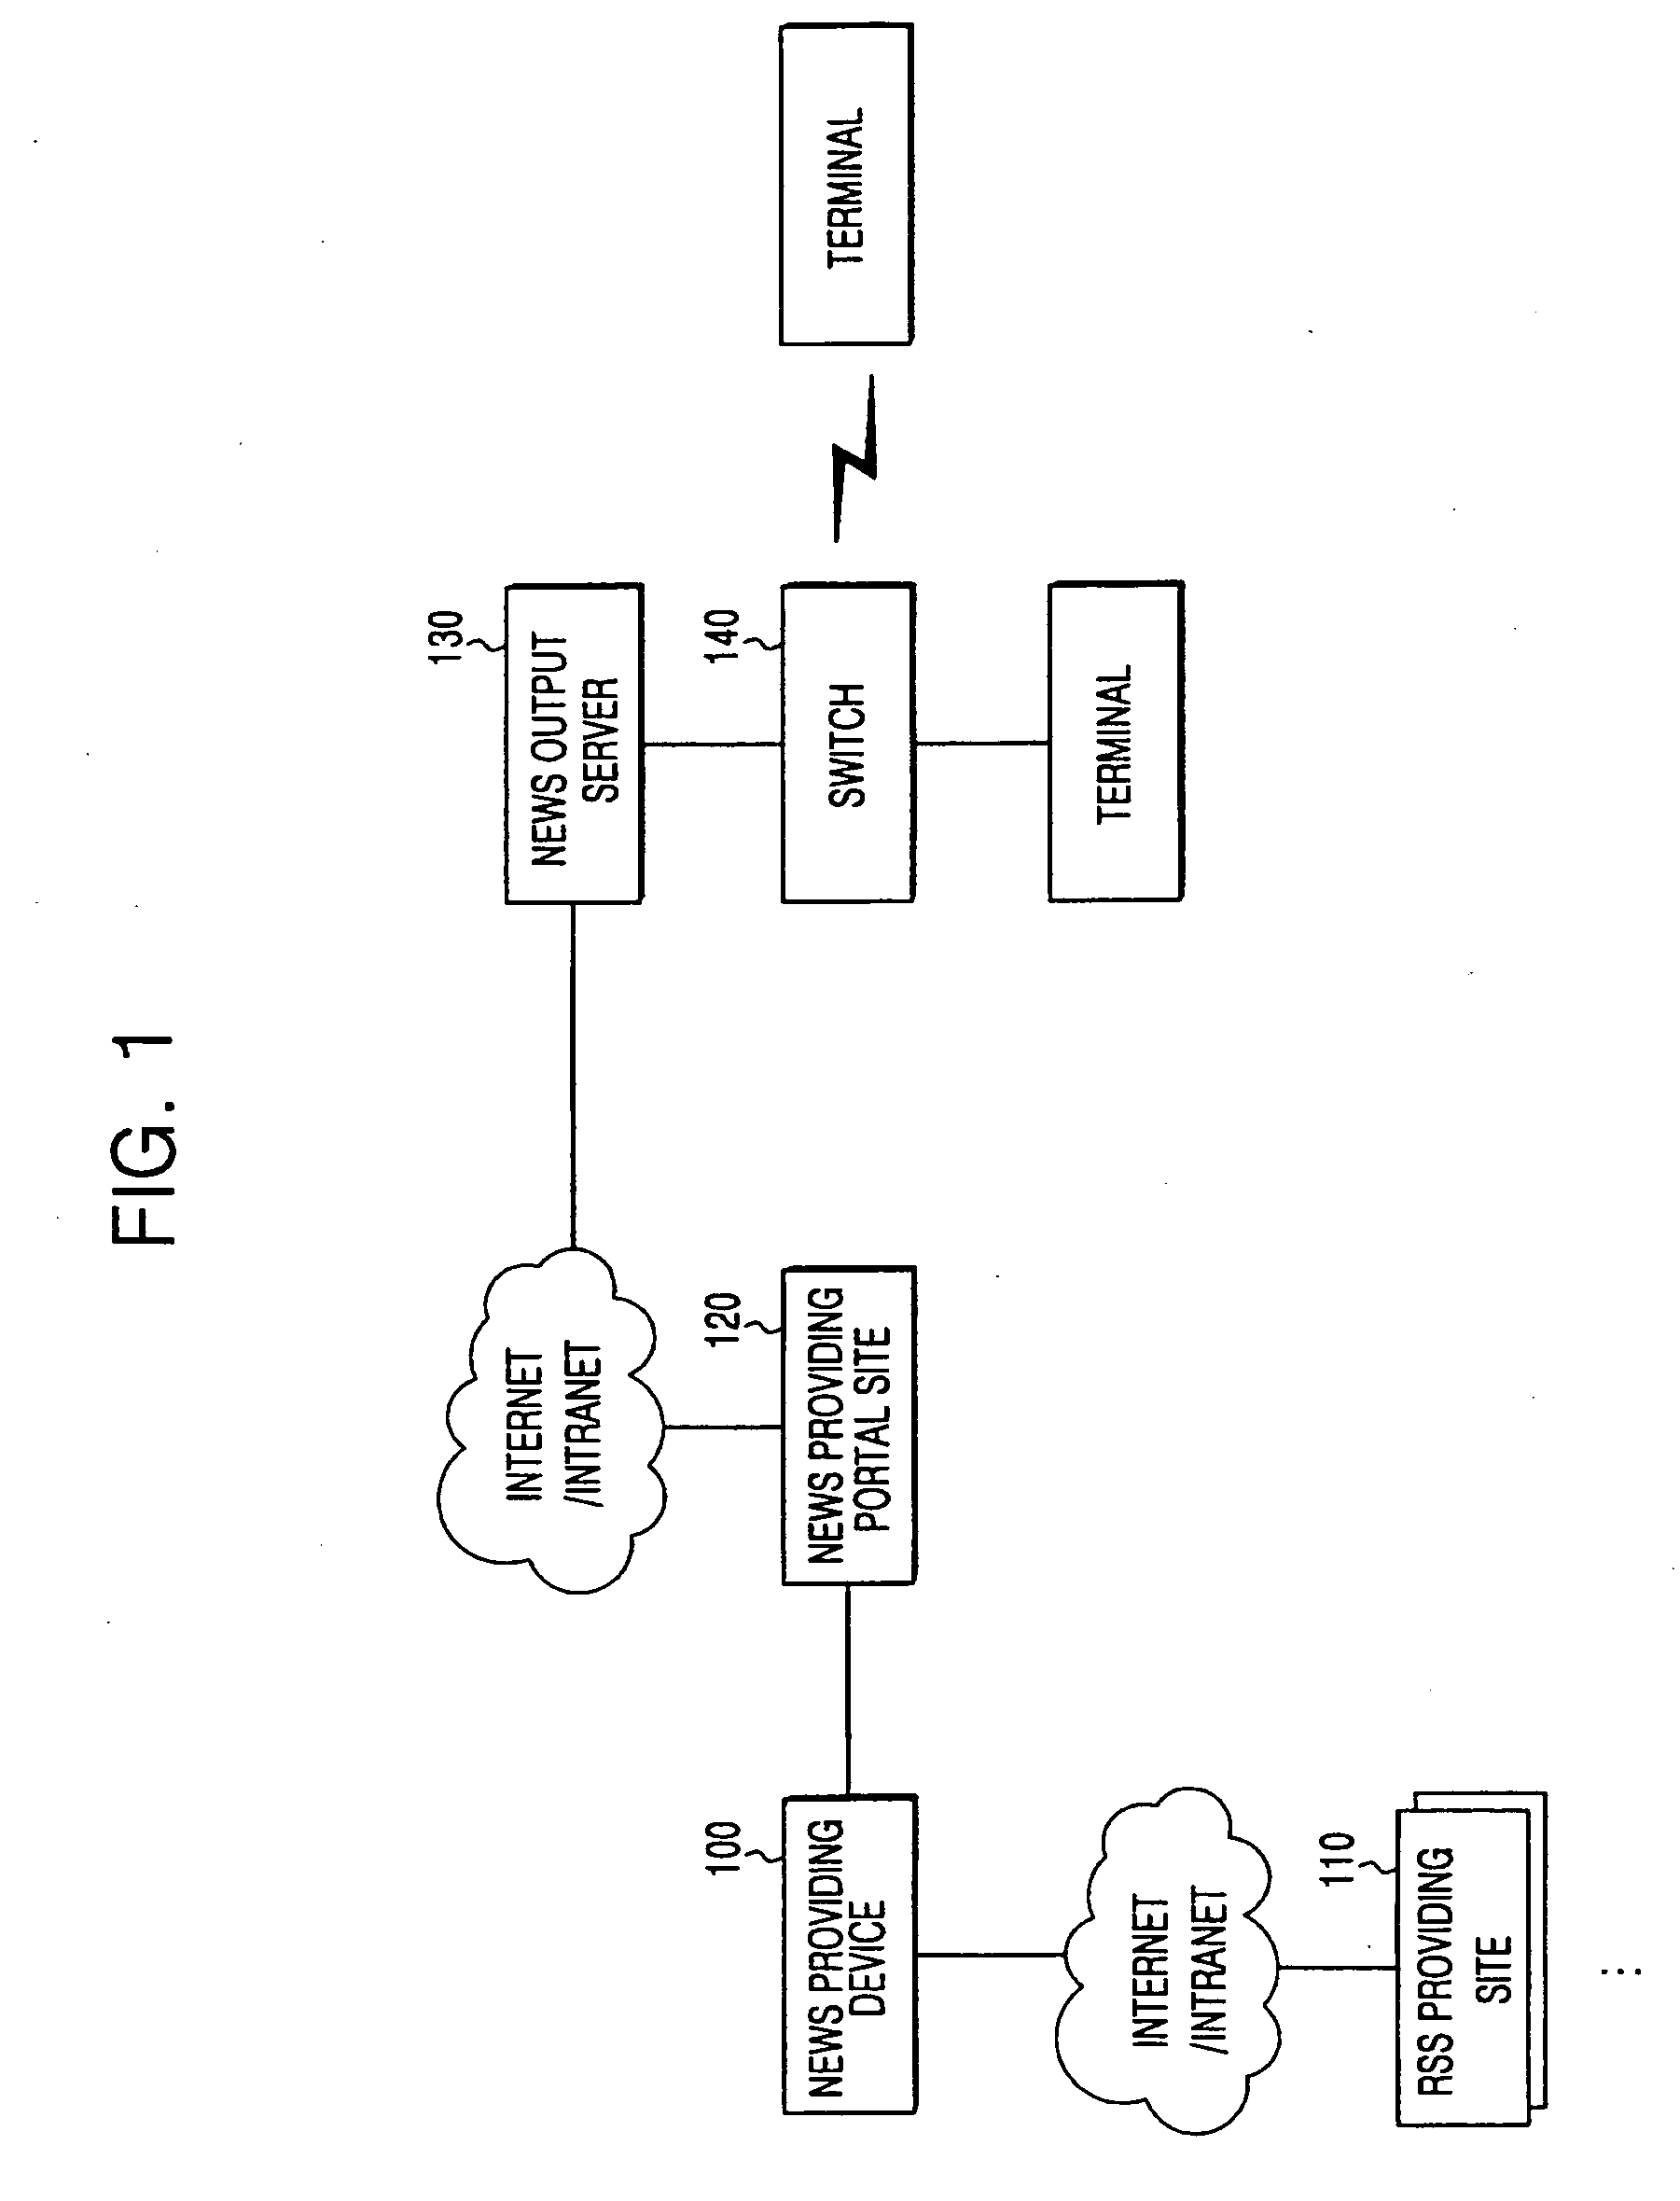 System and method for providing real time news